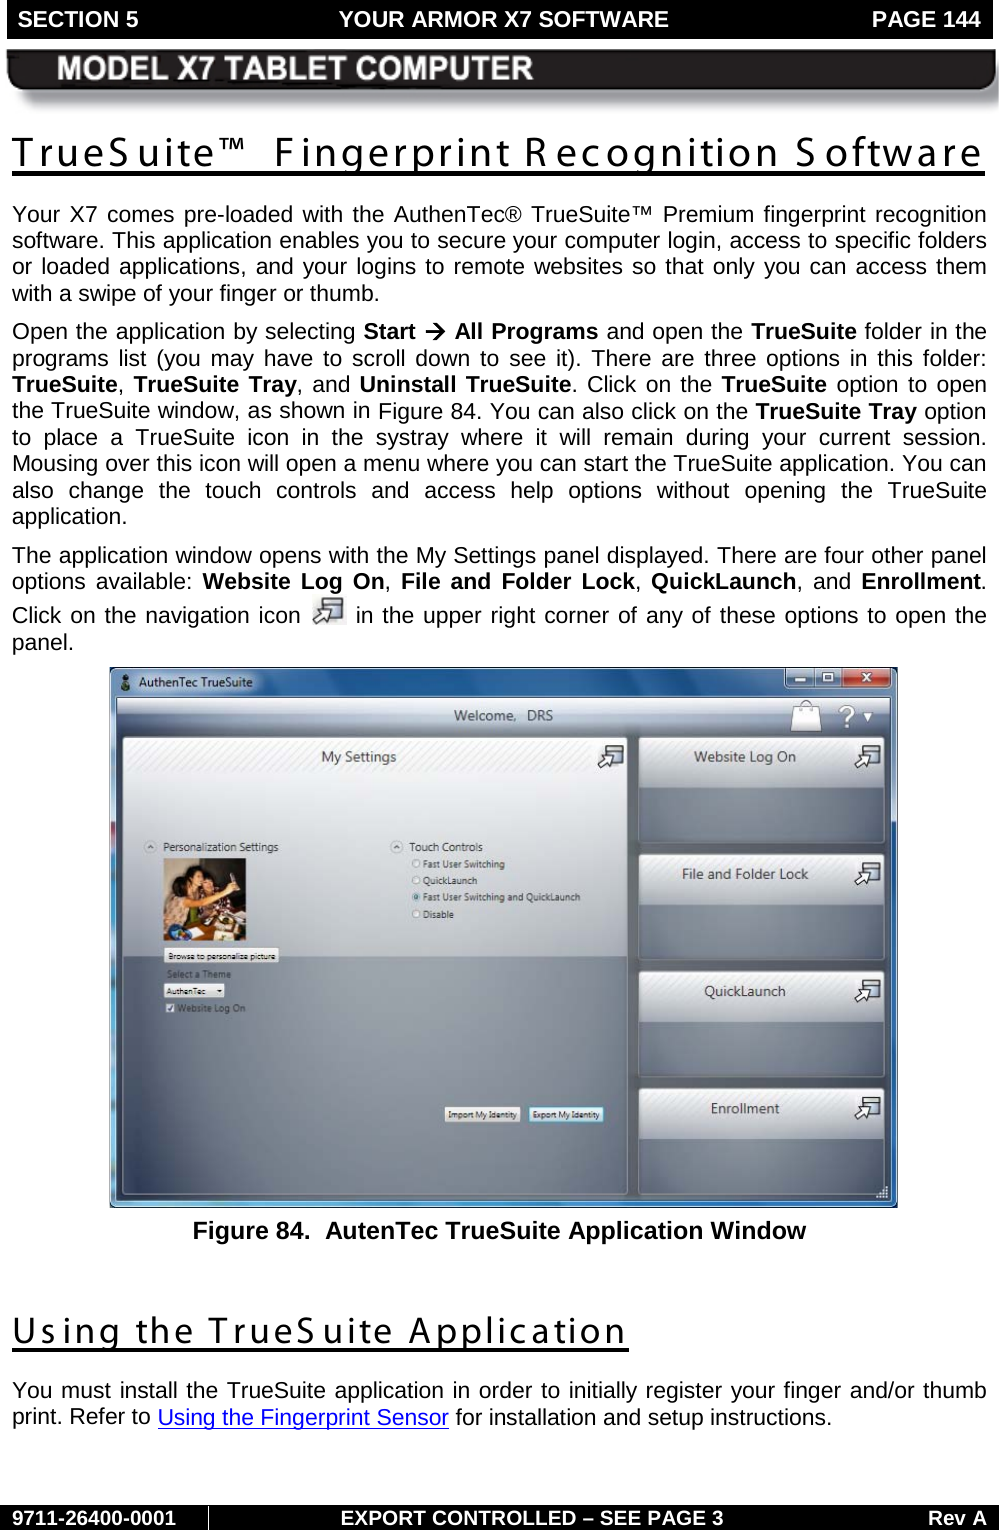 SECTION 5 YOUR ARMOR X7 SOFTWARE  PAGE 144        9711-26400-0001 EXPORT CONTROLLED – SEE PAGE 3 Rev A TrueS uite™  Fingerprint R ecognition S oftware Your X7 comes pre-loaded with the AuthenTec® TrueSuite™ Premium fingerprint recognition software. This application enables you to secure your computer login, access to specific folders or loaded applications, and your logins to remote websites so that only you can access them with a swipe of your finger or thumb.  Open the application by selecting Start à All Programs and open the TrueSuite folder in the programs list (you may have to scroll down to see it). There are three options in this folder: TrueSuite, TrueSuite Tray, and Uninstall TrueSuite. Click on the TrueSuite option to open the TrueSuite window, as shown in Figure 84. You can also click on the TrueSuite Tray option to place a TrueSuite icon in the systray where it will remain during your current session. Mousing over this icon will open a menu where you can start the TrueSuite application. You can also change the touch controls and access help options without opening the TrueSuite application. The application window opens with the My Settings panel displayed. There are four other panel options available: Website Log On, File and Folder Lock,  QuickLaunch, and Enrollment. Click on the navigation icon   in the upper right corner of any of these options to open the panel.  Figure 84.  AutenTec TrueSuite Application Window  Us ing the TrueS uite Application You must install the TrueSuite application in order to initially register your finger and/or thumb print. Refer to Using the Fingerprint Sensor for installation and setup instructions.    